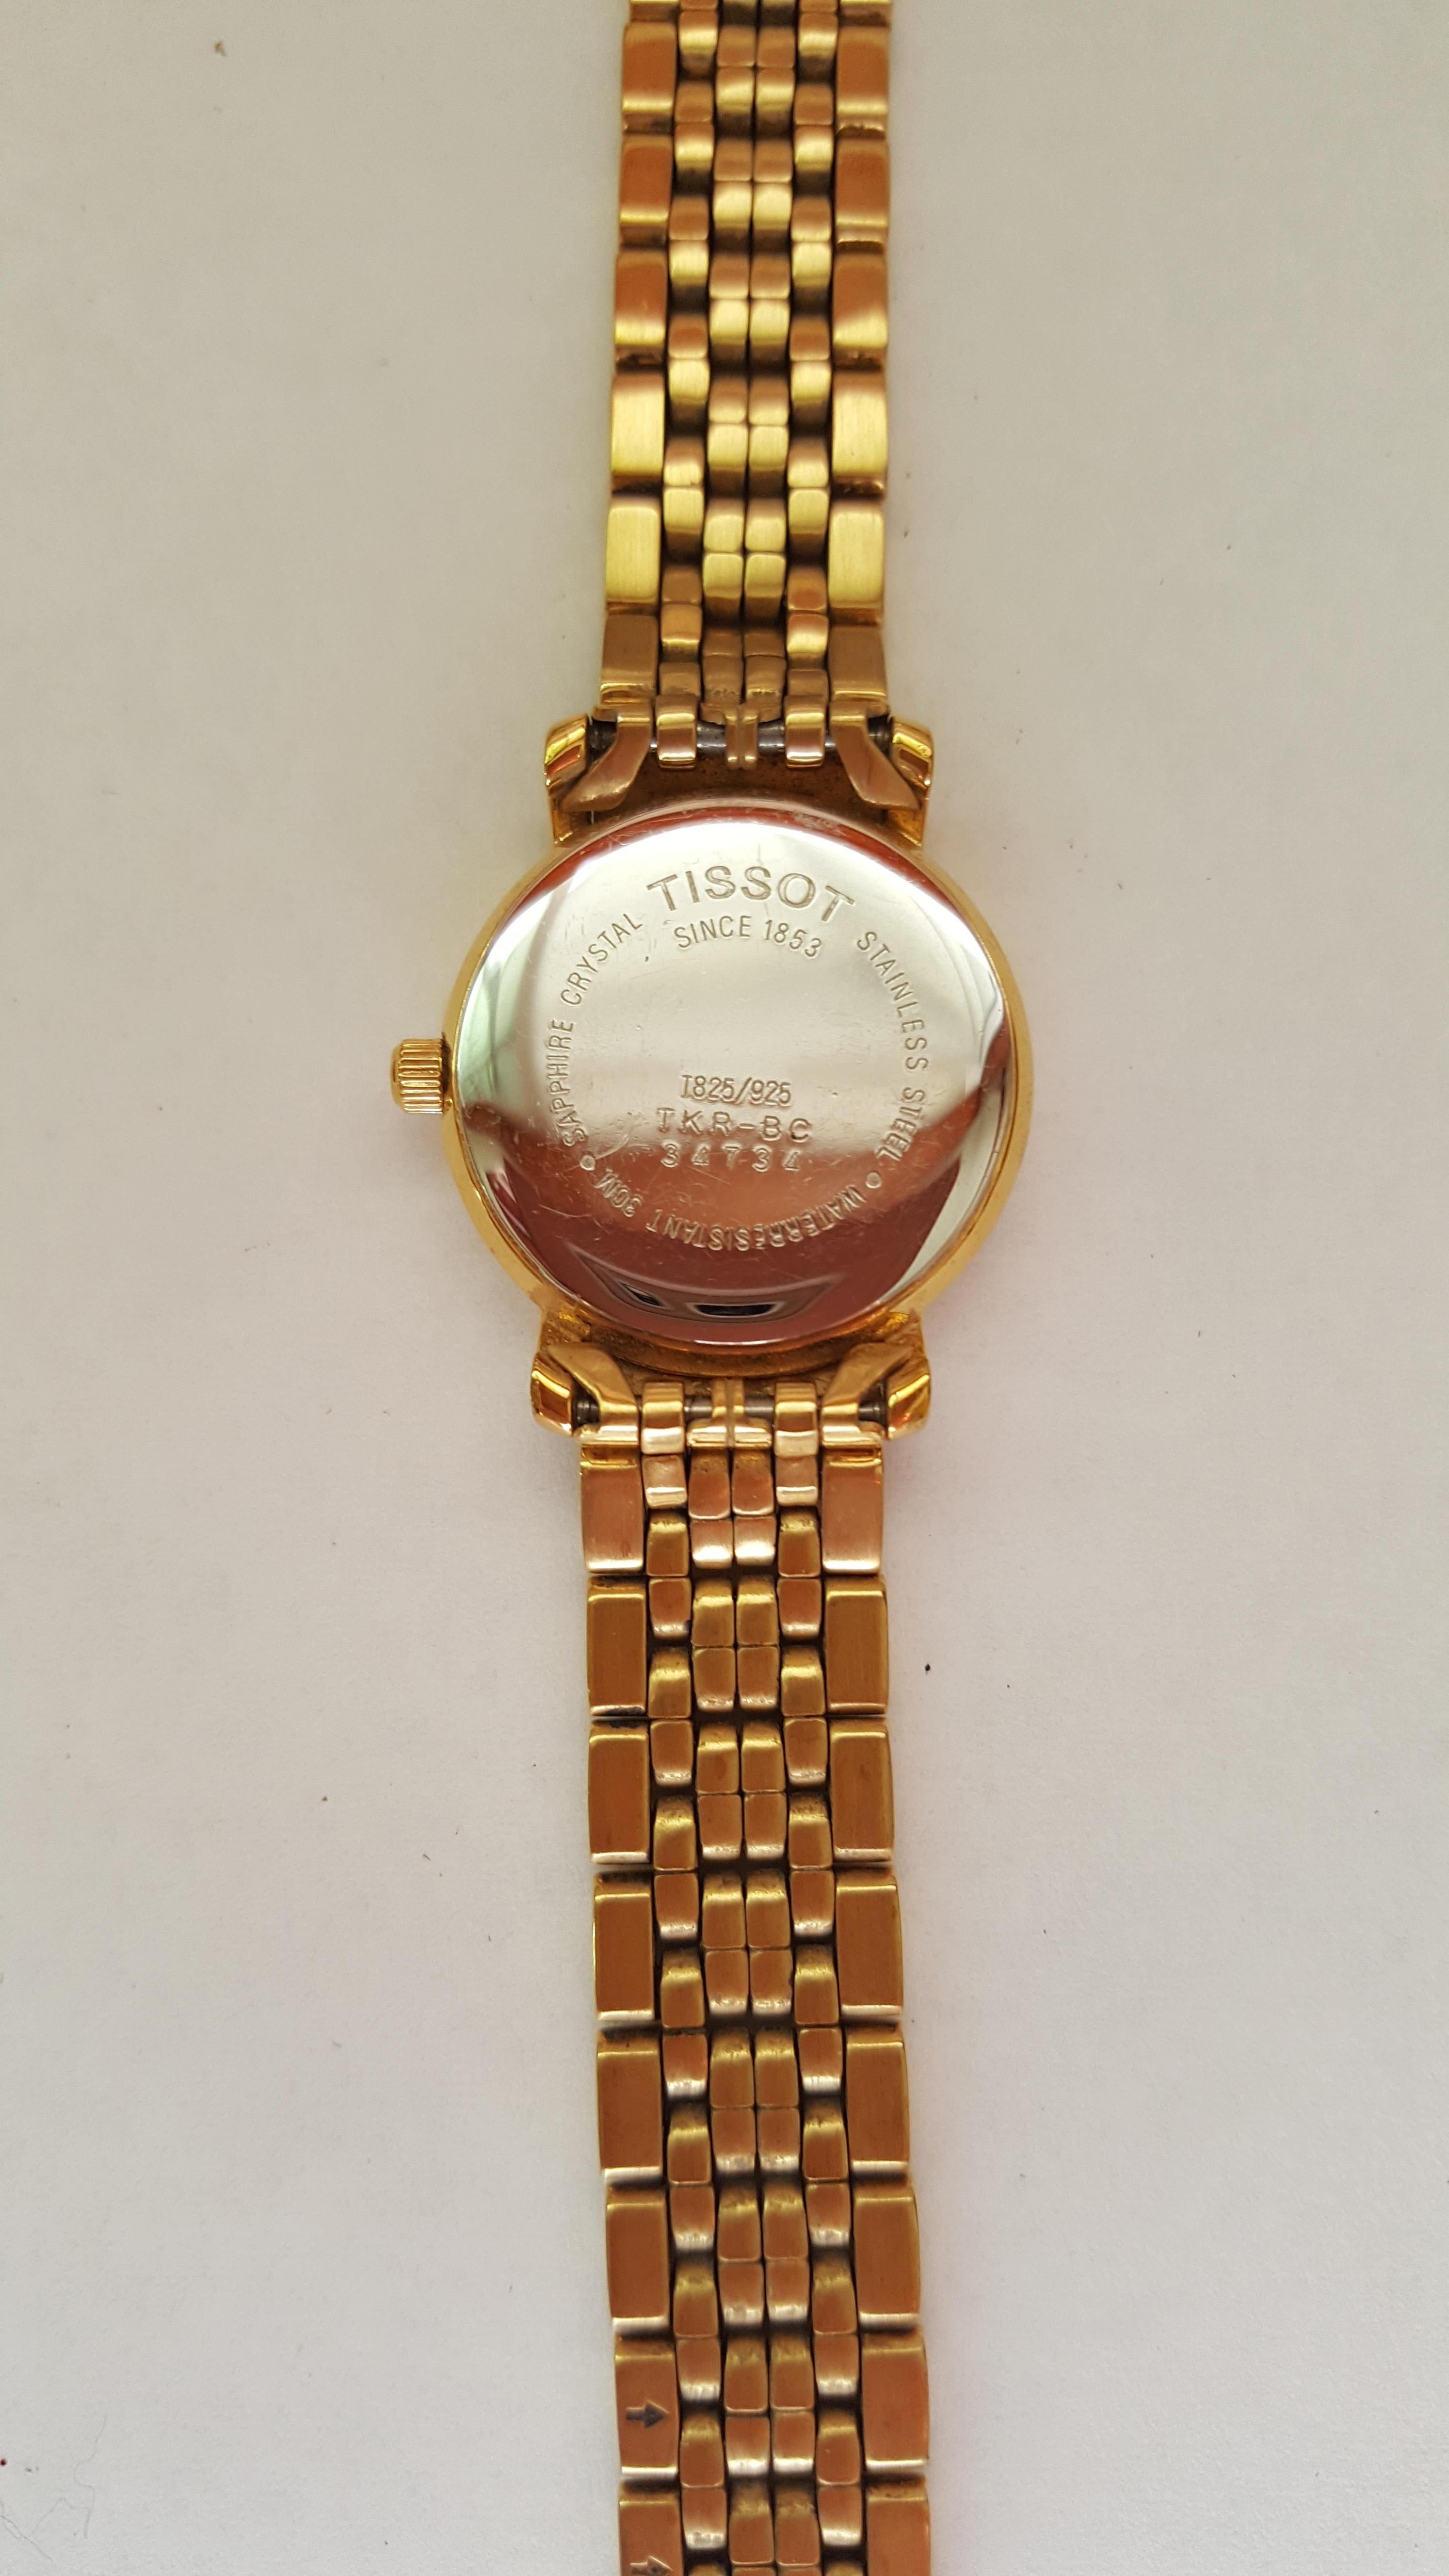 Contemporary Ladies Tissot Watch Gold-Plated Stainless Steel Water Resistant